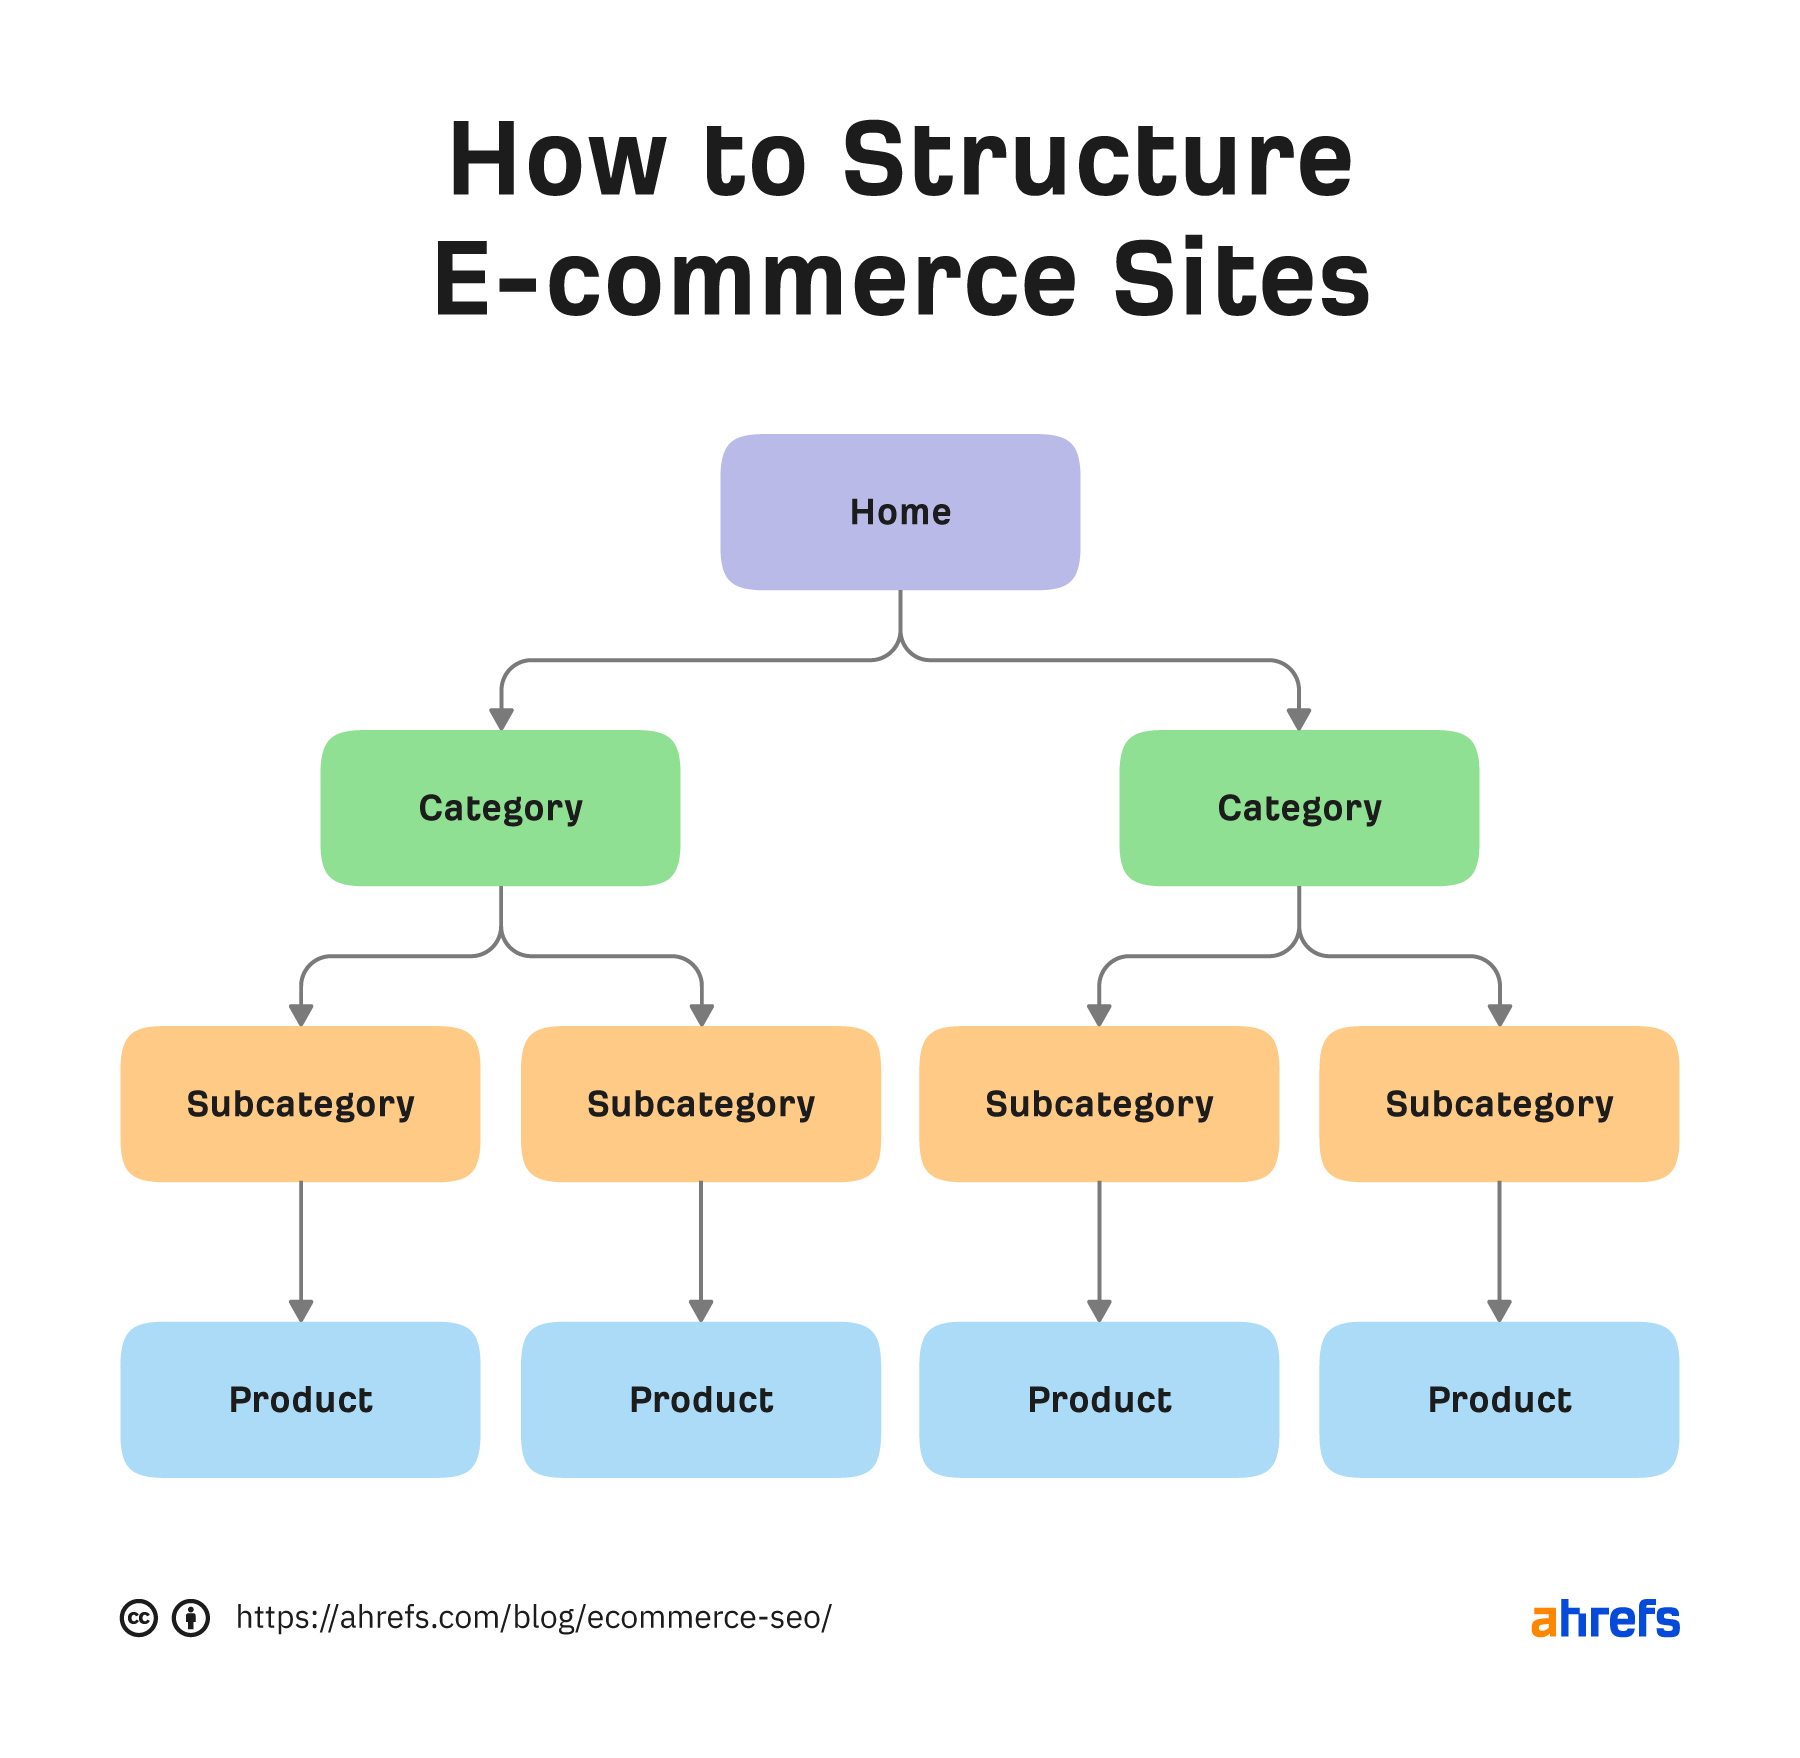 How to structure e-commerce sites